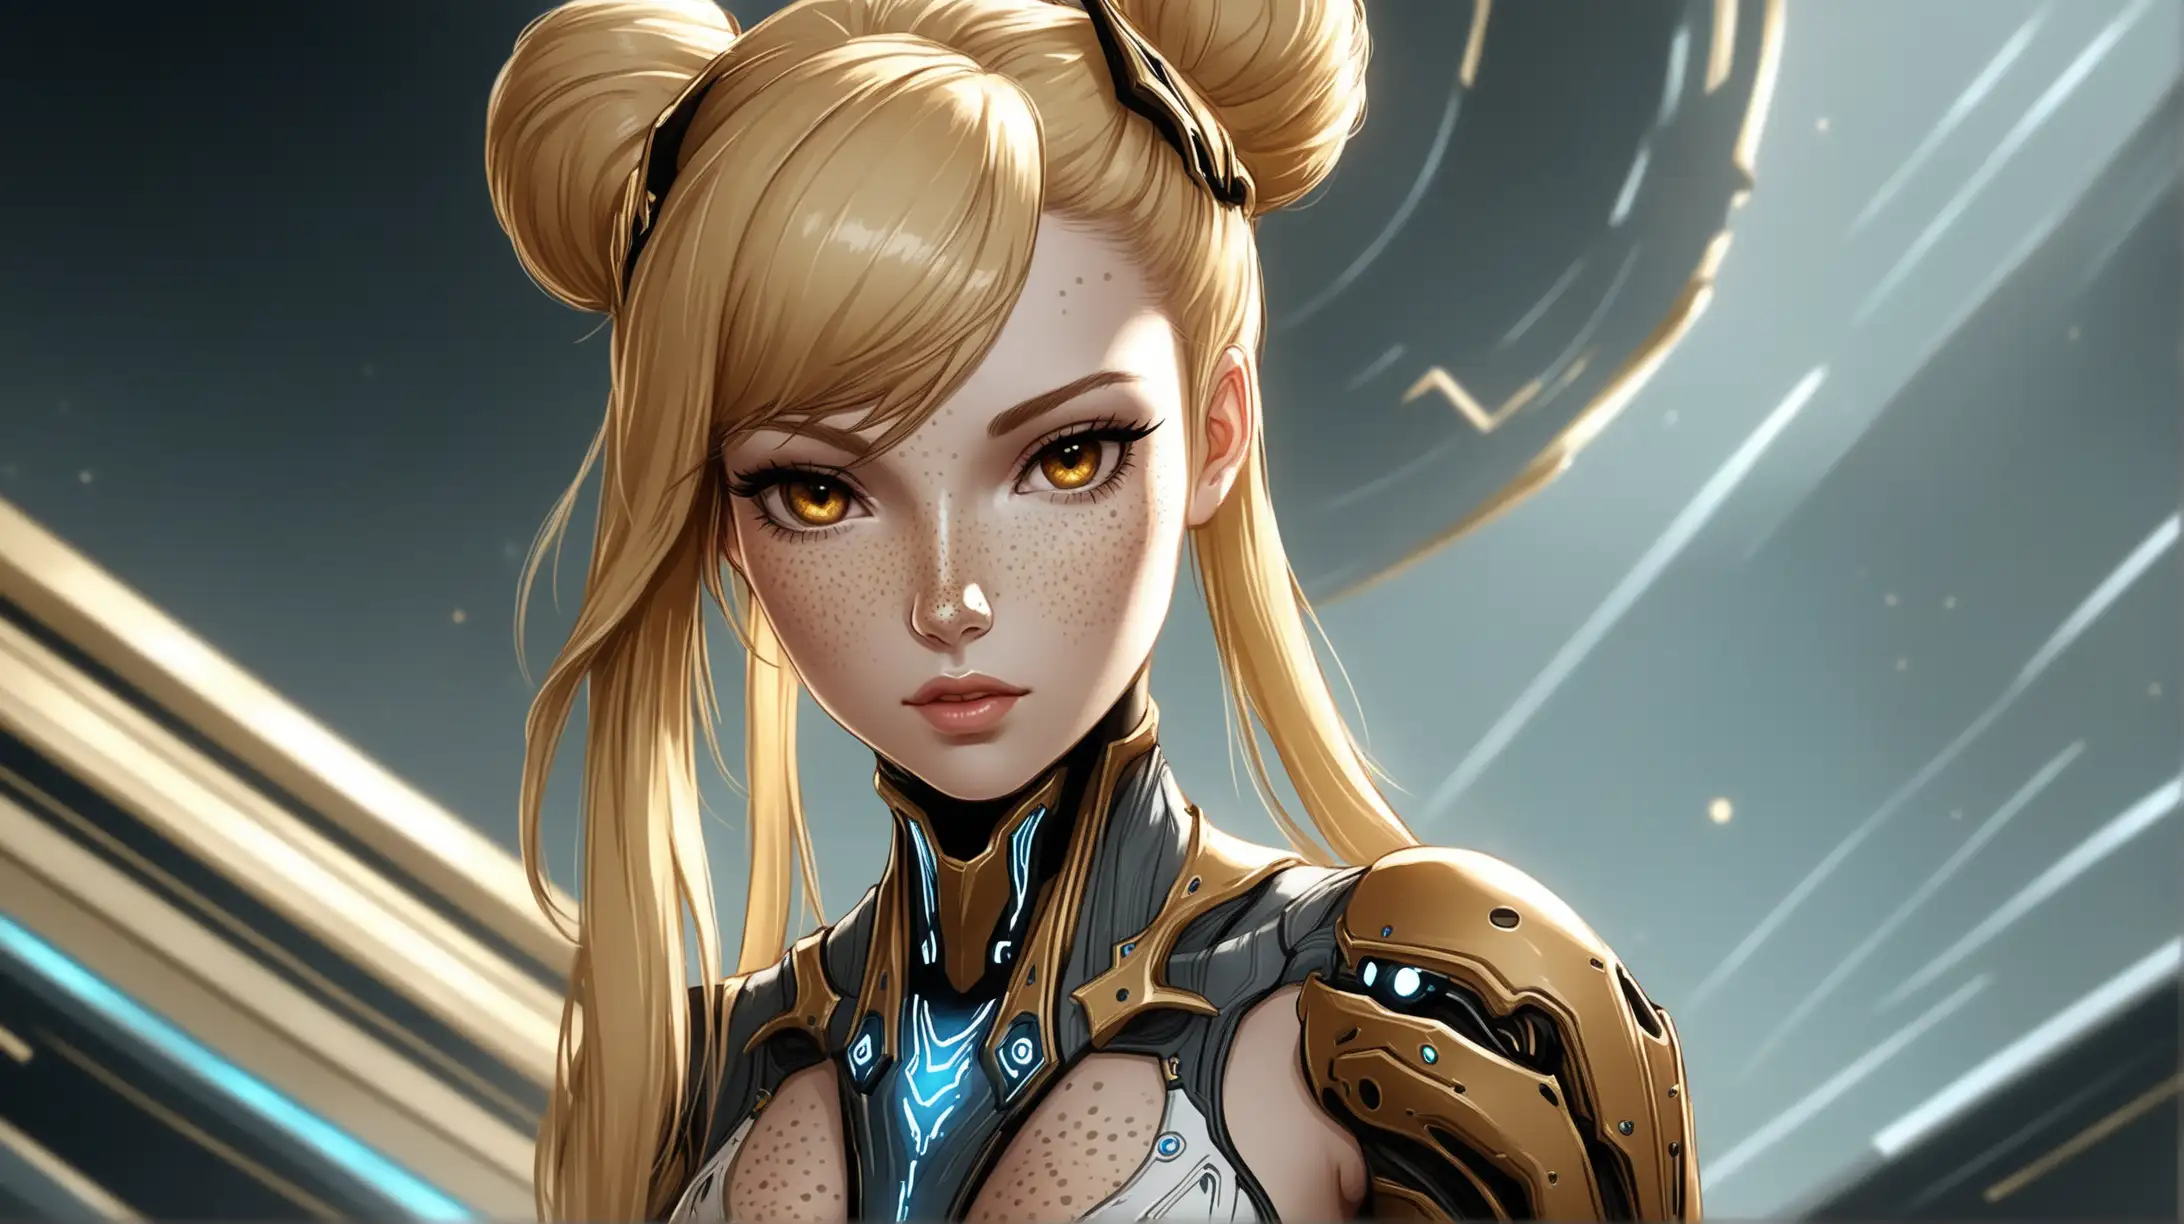 Seductive Blonde Woman with Warframeinspired Outfit Leaning In